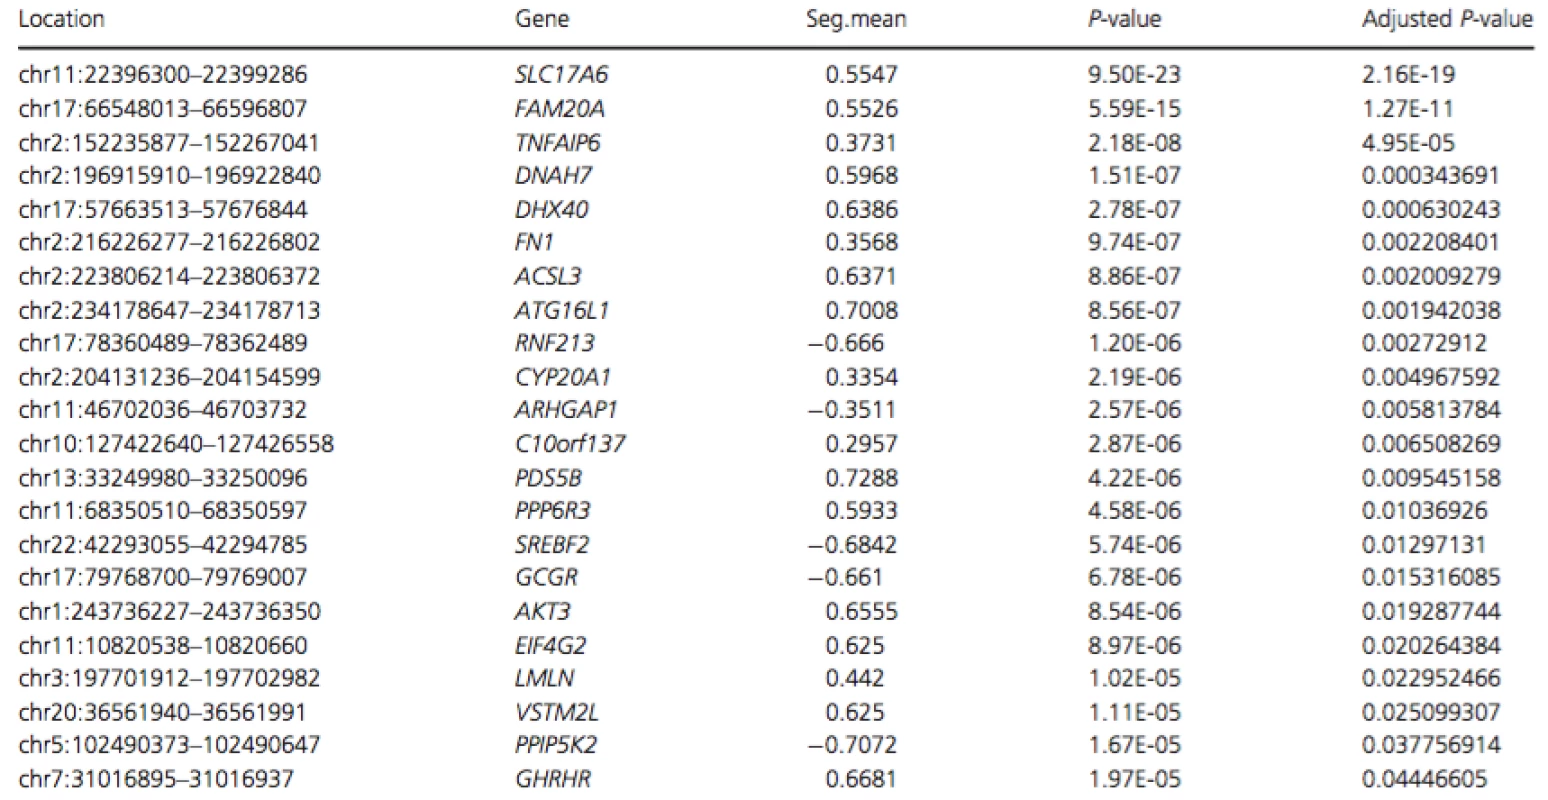 List of regions with significant P-values (<0.05) following analysis of WES data using FishingCNV